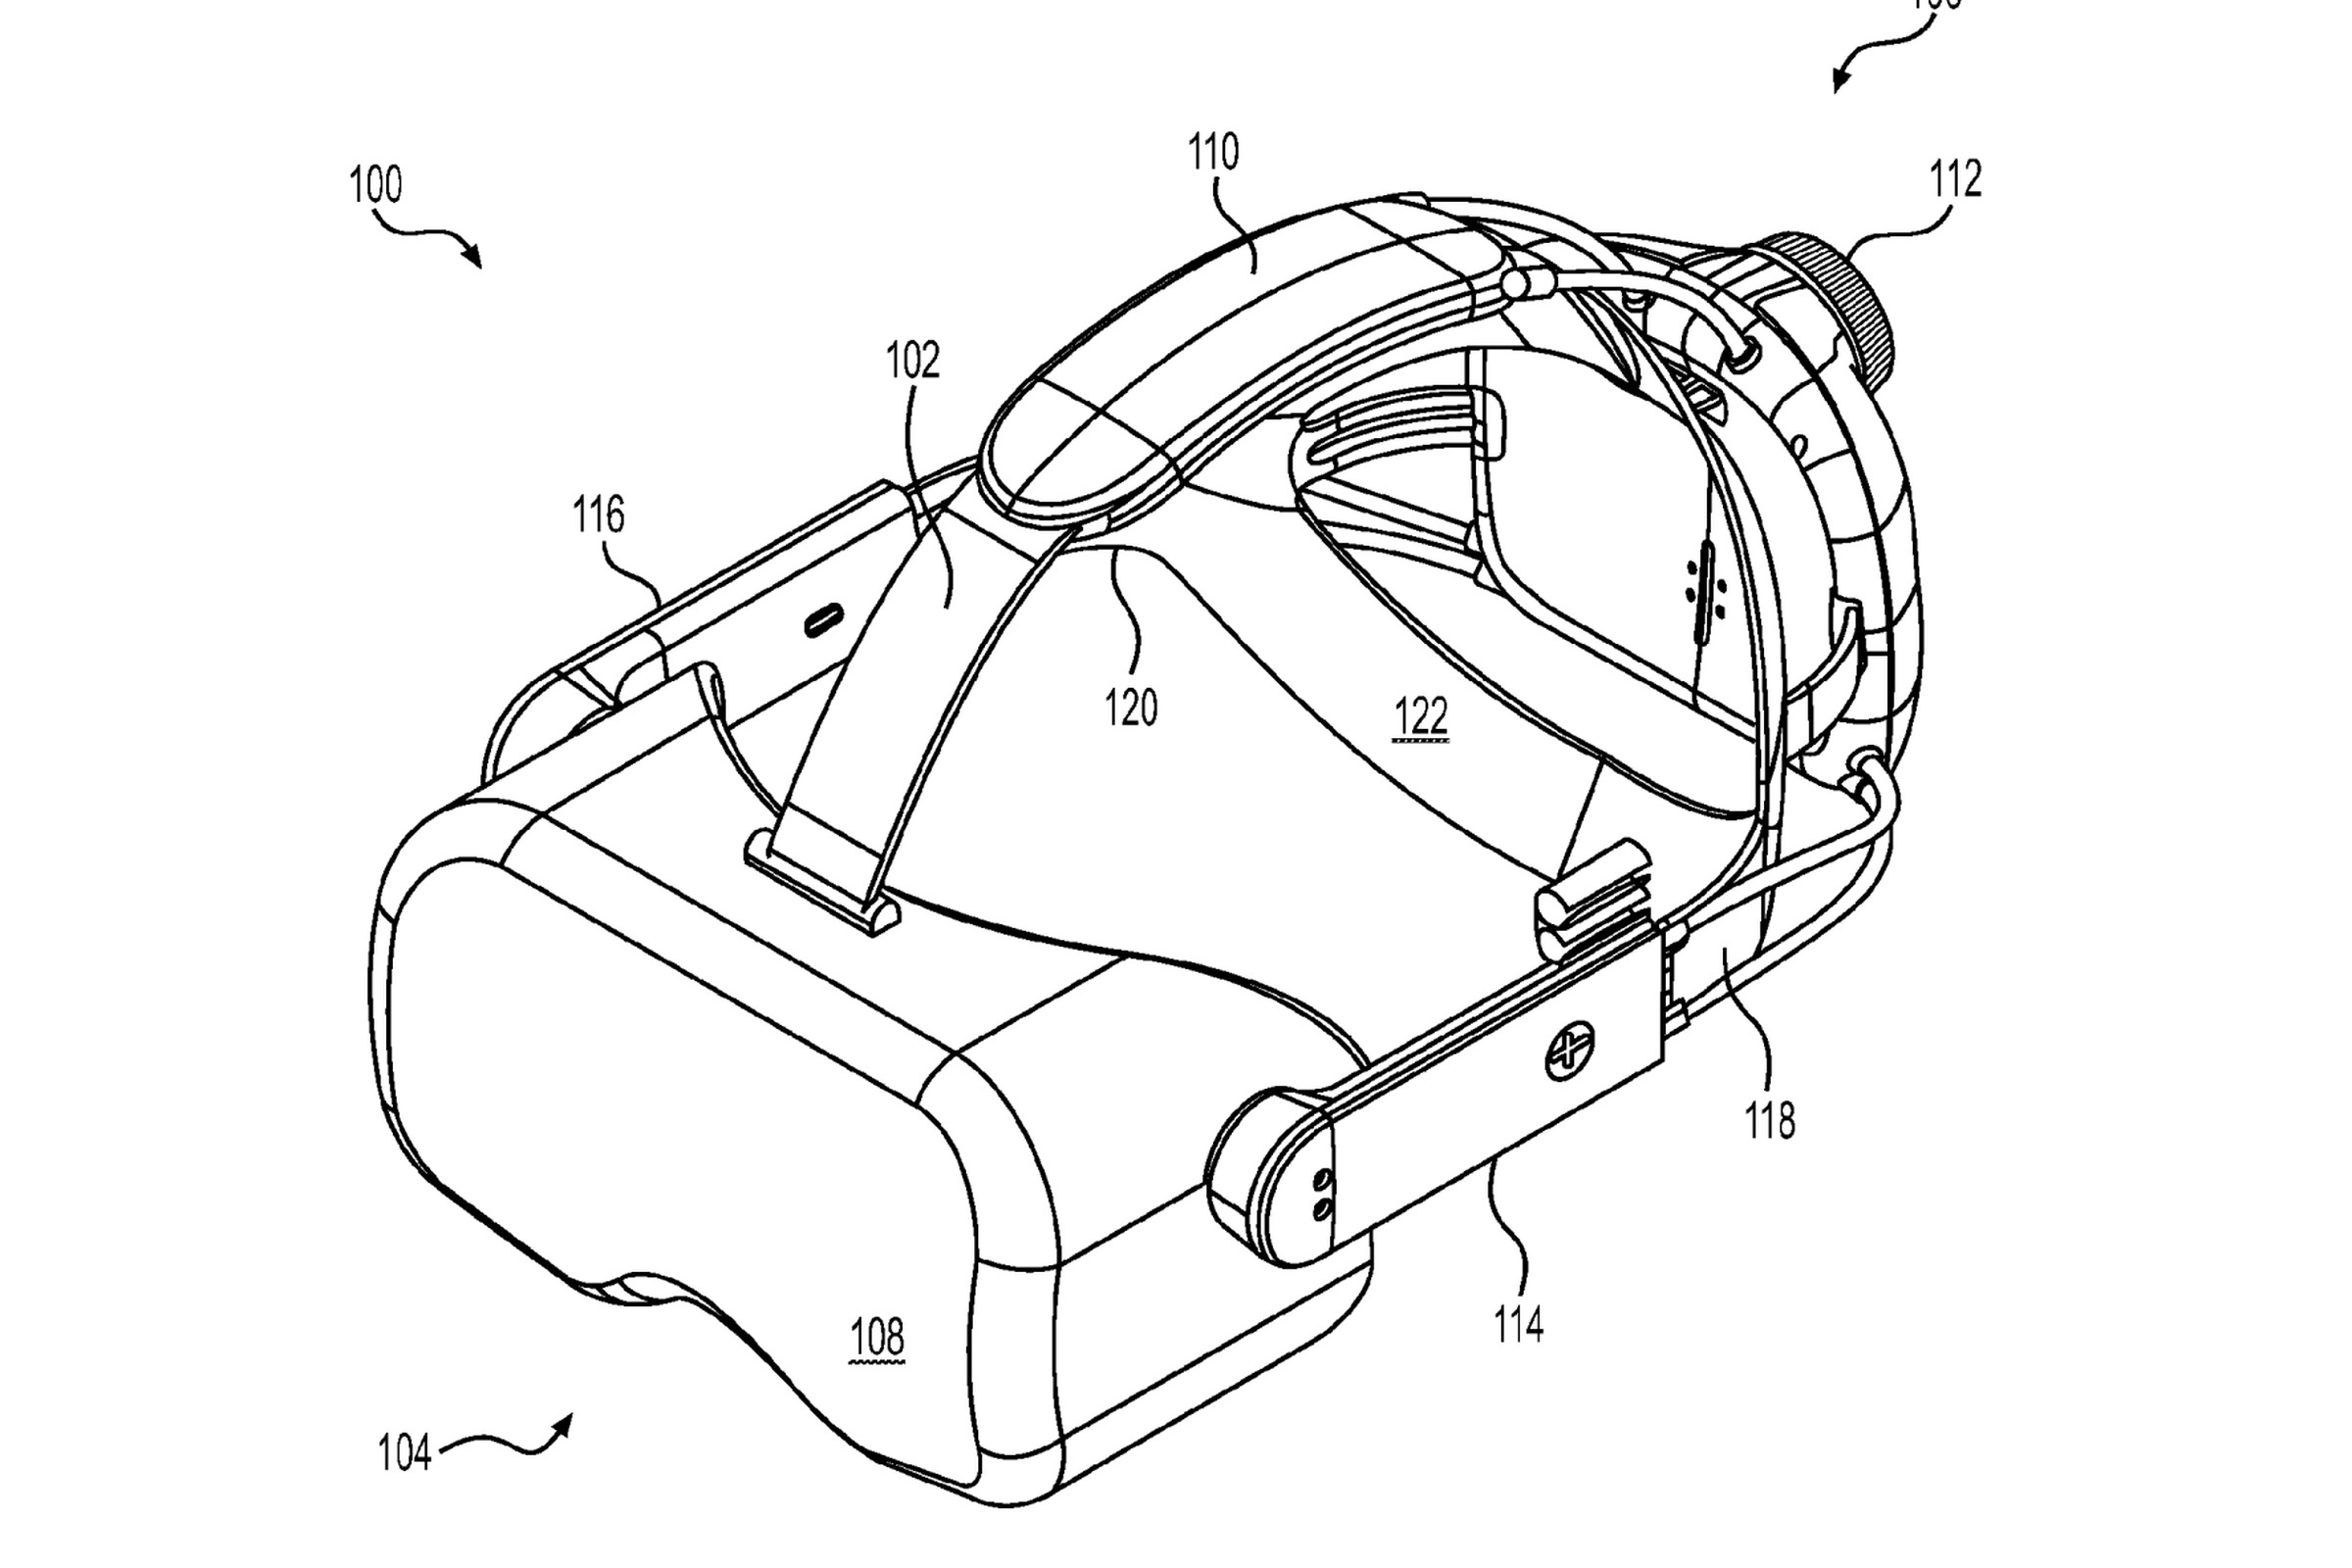 The full headset taken from the recently-published Valve patent. 